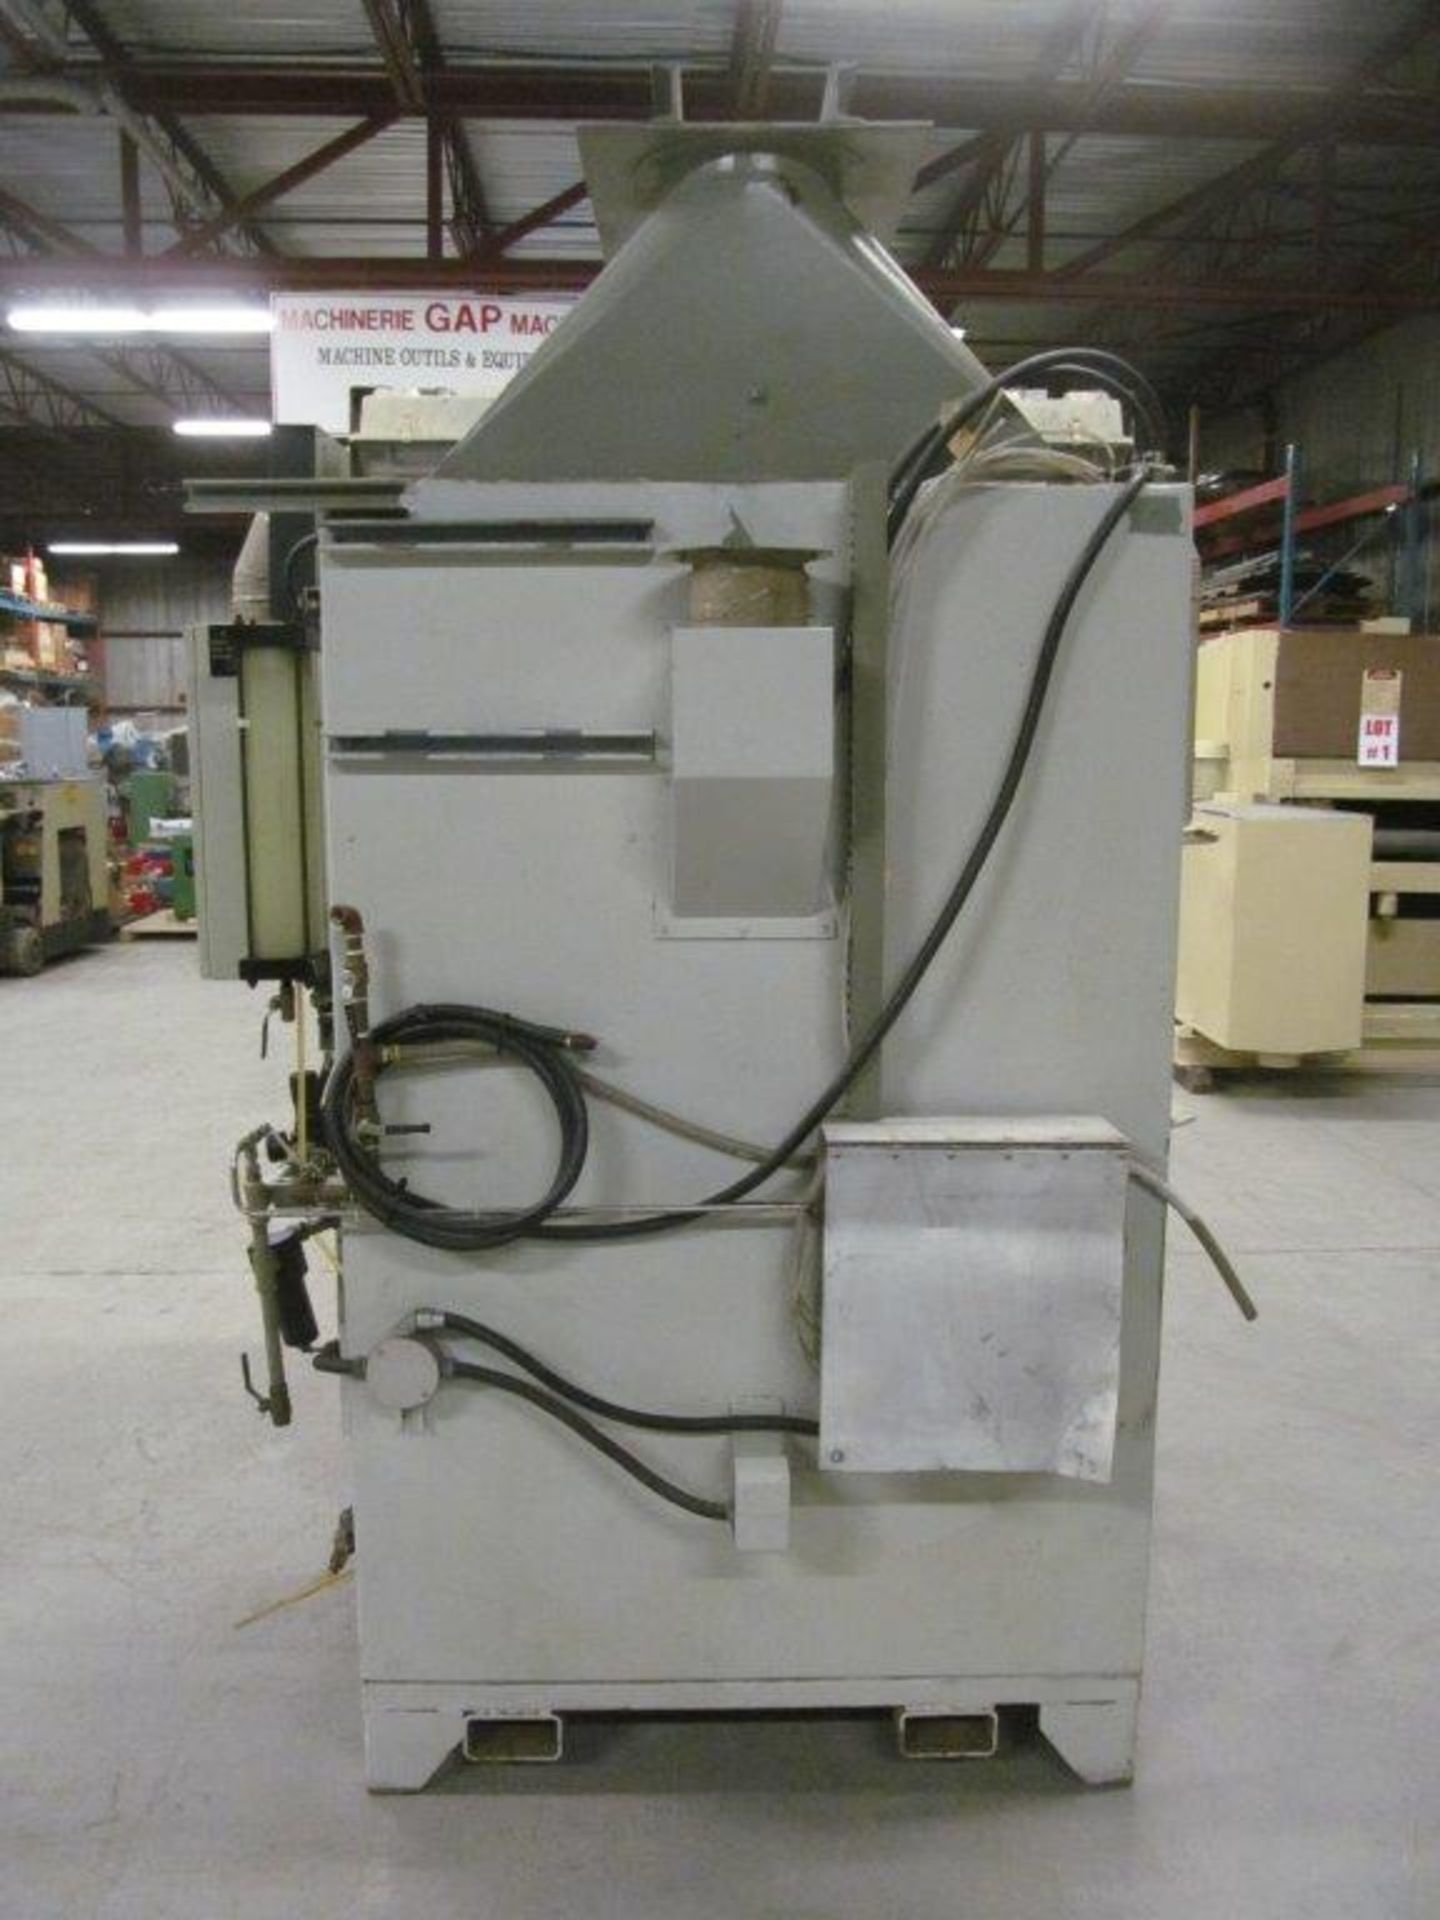 CLEANING SPRAY BOOTH MODEL MC98-062, ELECTRICS: 575V / 3PH / 60C, CONDITION UNKNOWN - Image 6 of 11